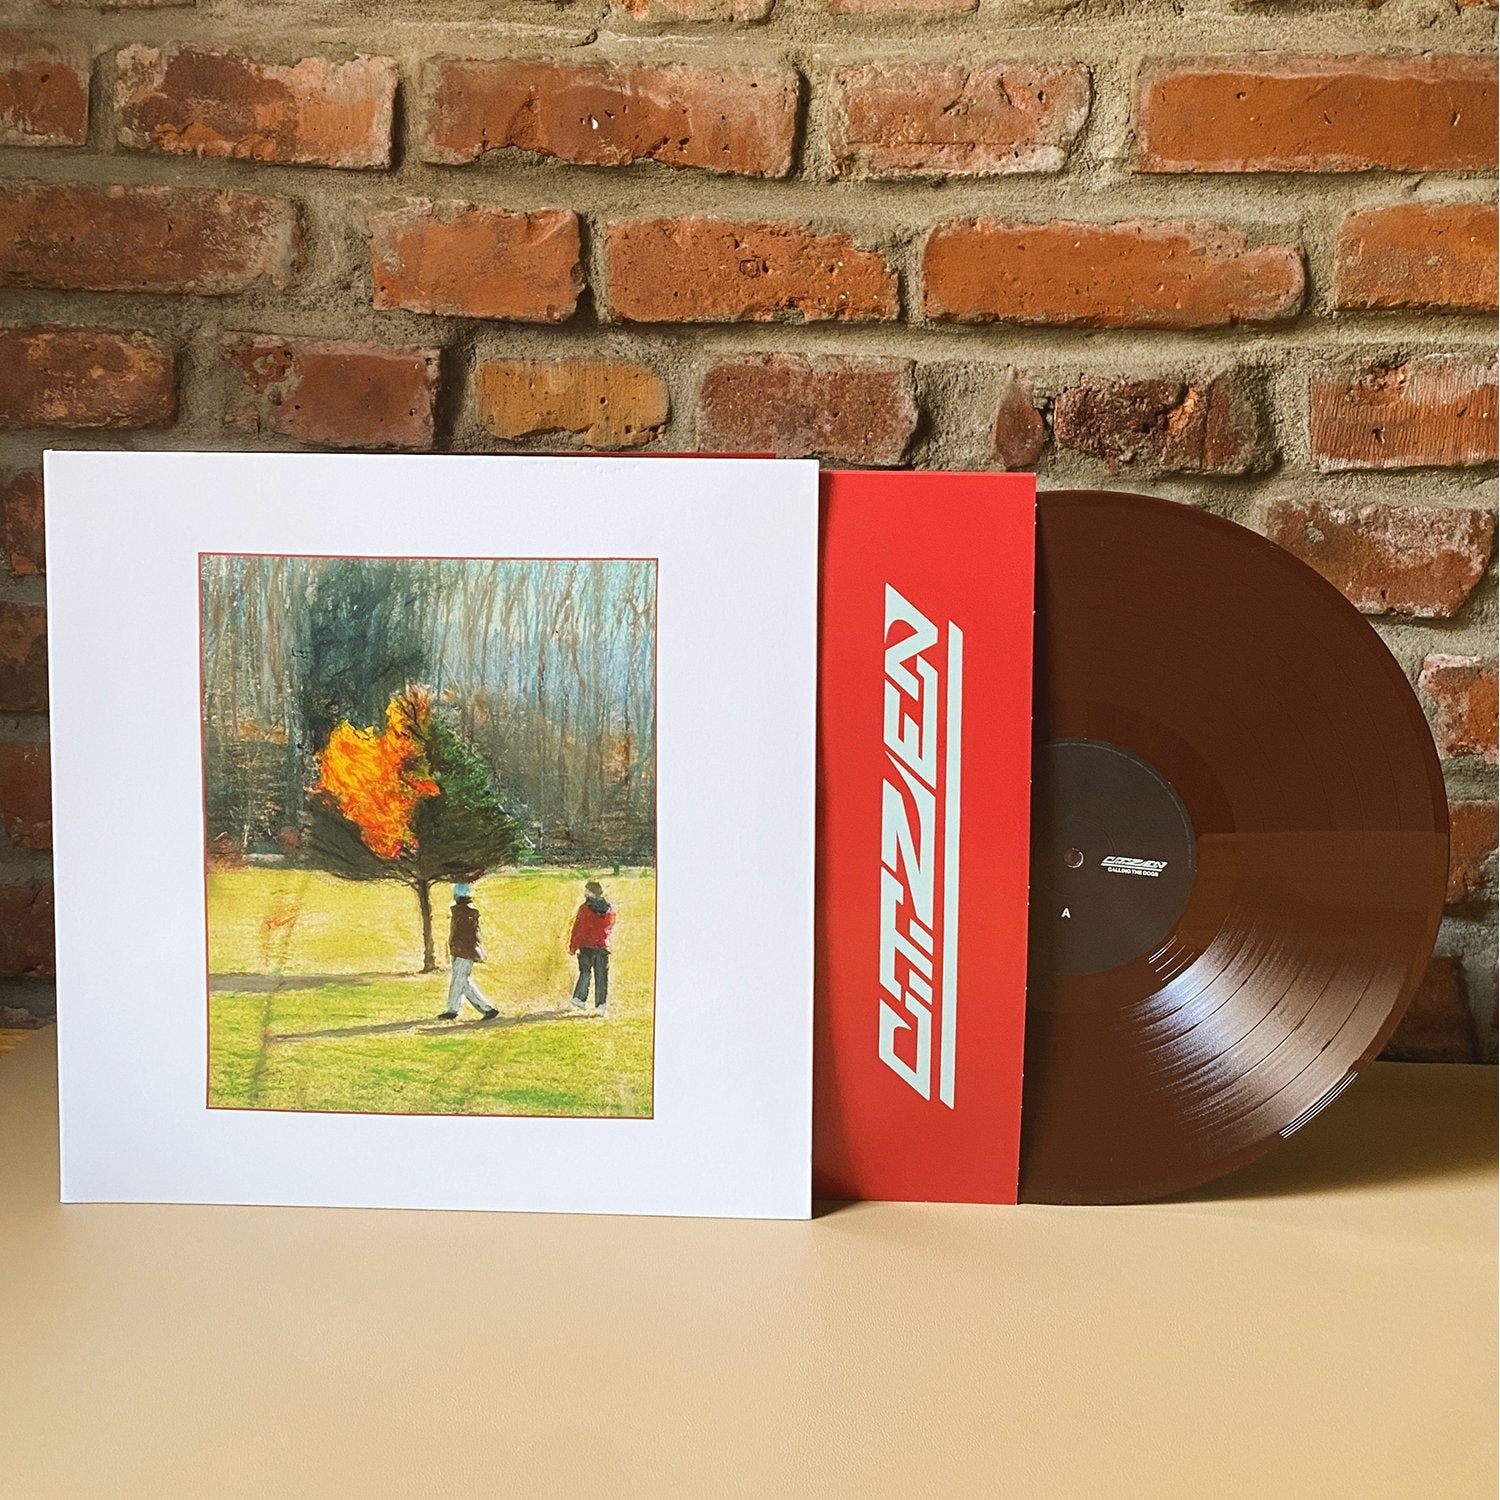 Citizen - Calling the Dogs: Limited Edition Brown Vinyl - Steadfast Records